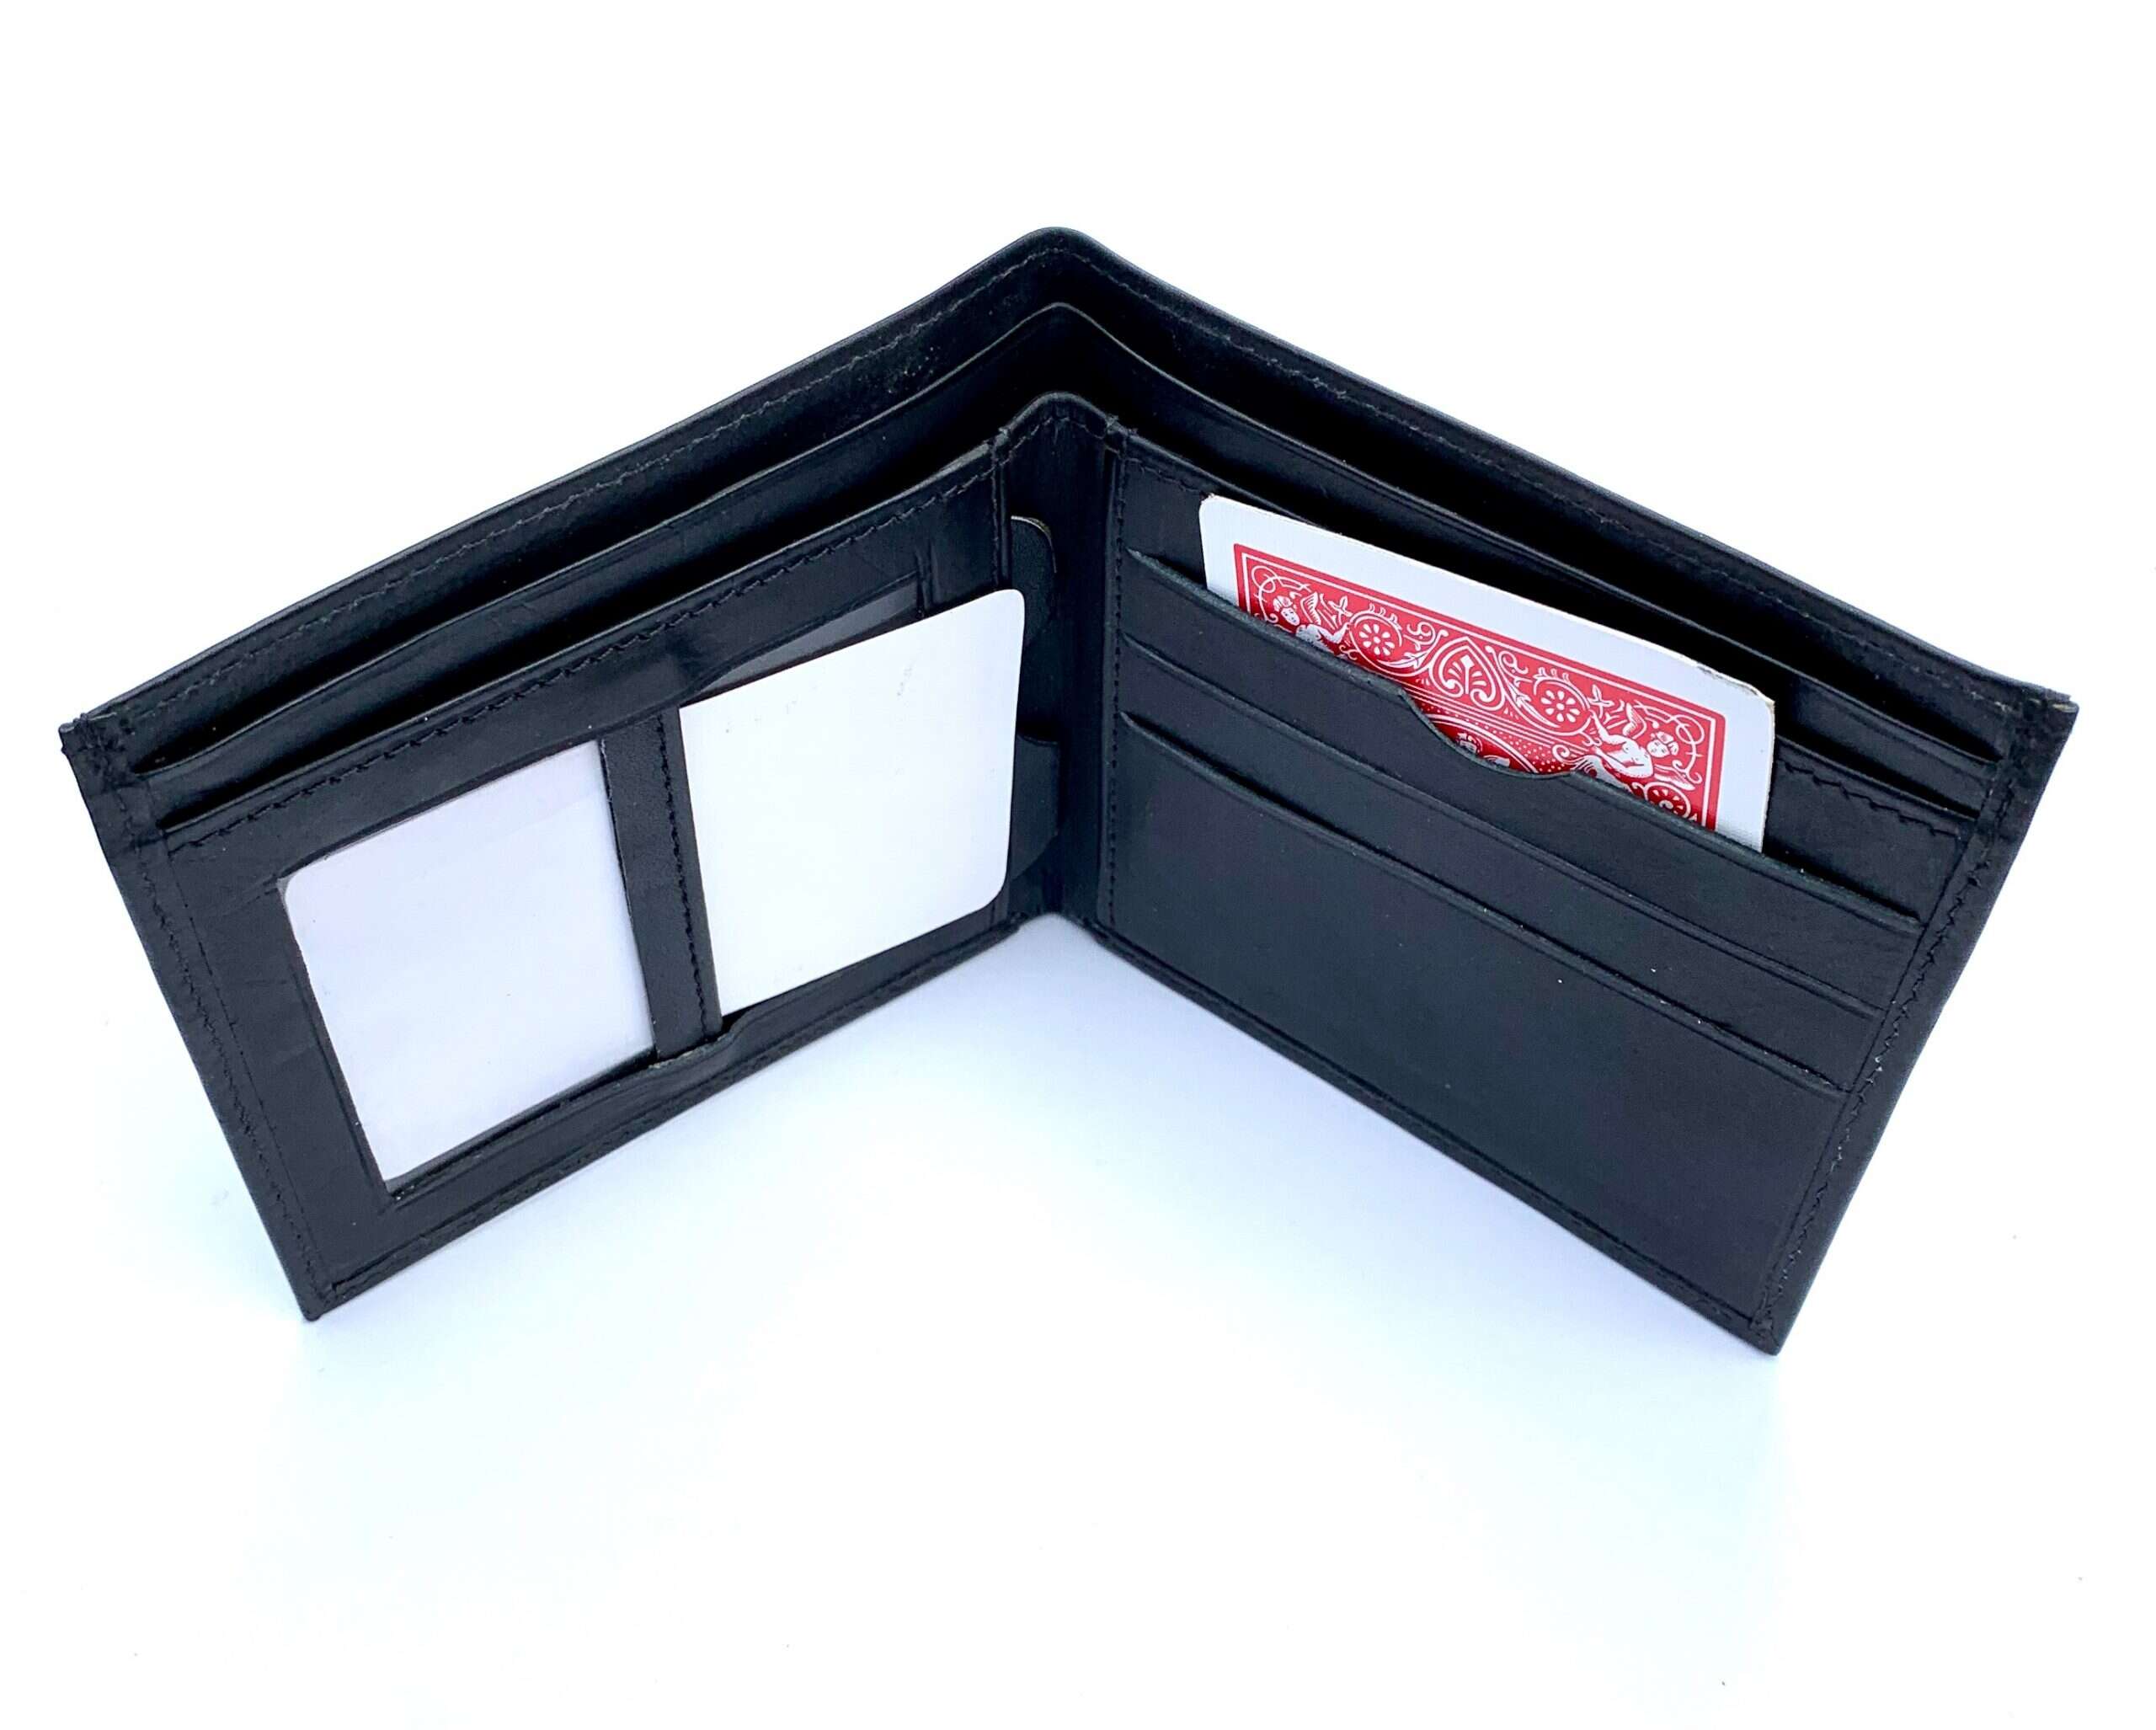 Pro Show Wallet by Premium Magic with business cards and red playing card inside